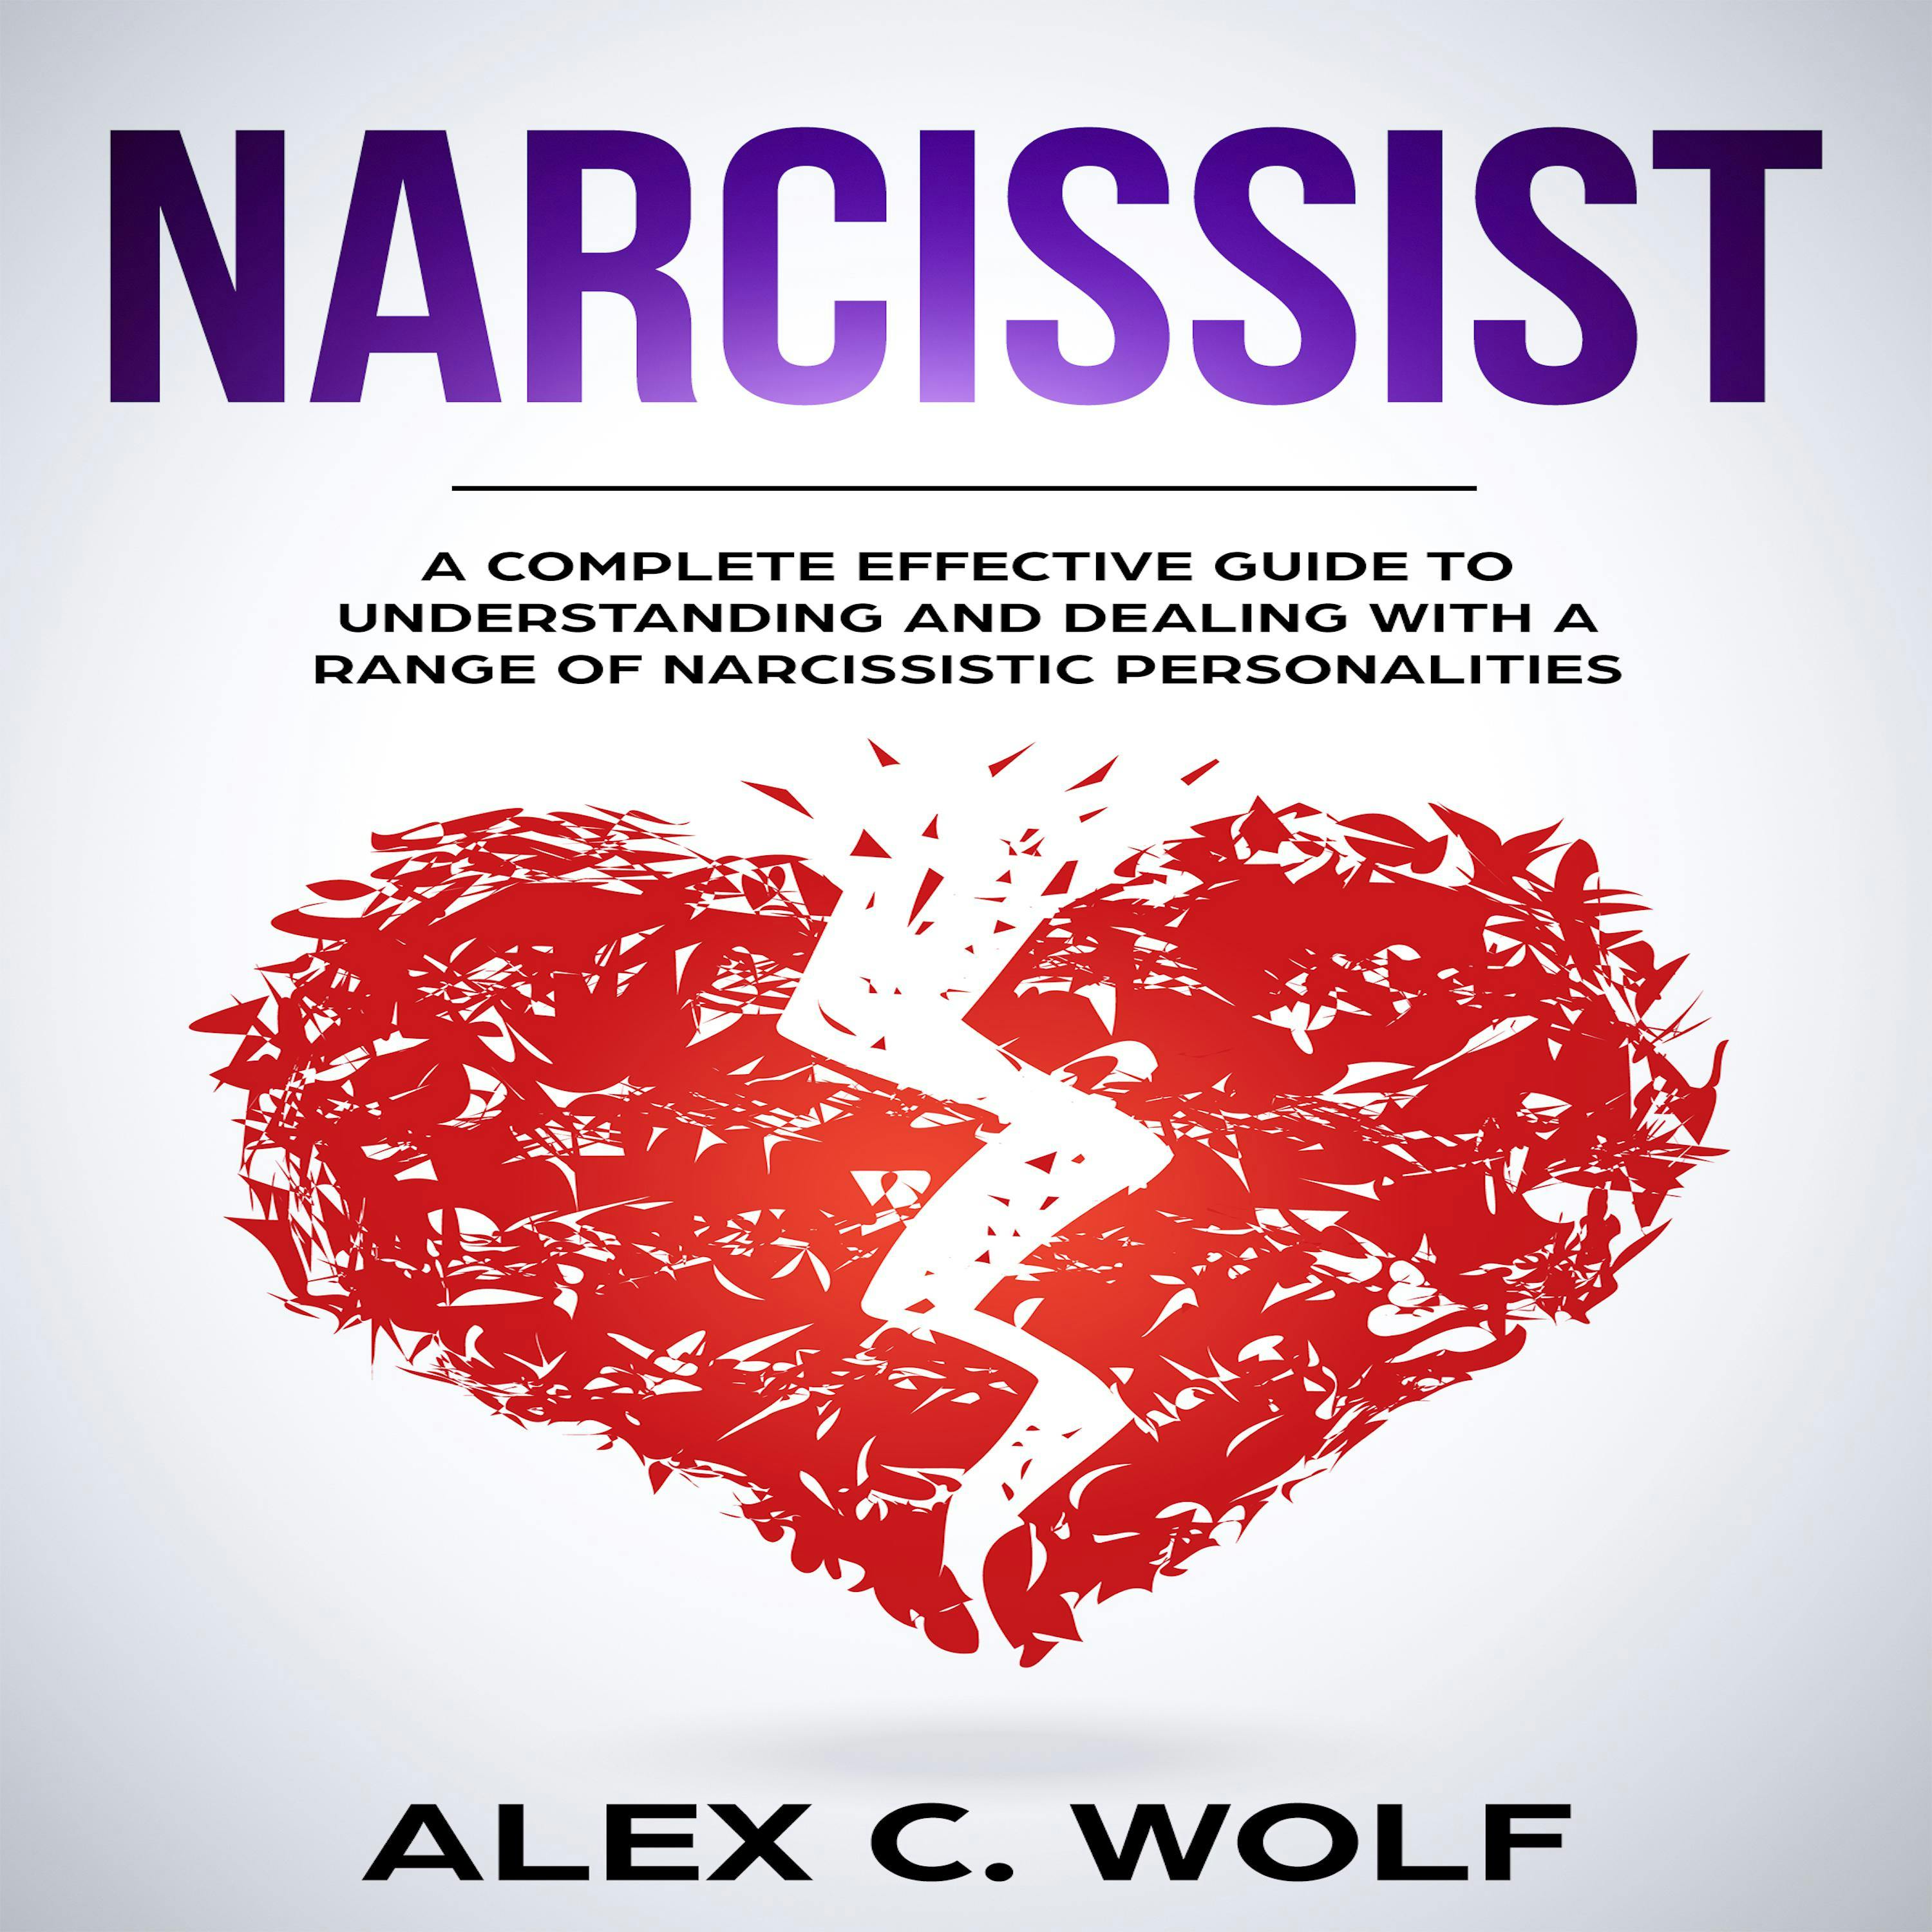 Narcissist: A Complete Effective Guide To Understanding And Dealing With A Range Of Narcissistic Personalities - Alex C. Wolf